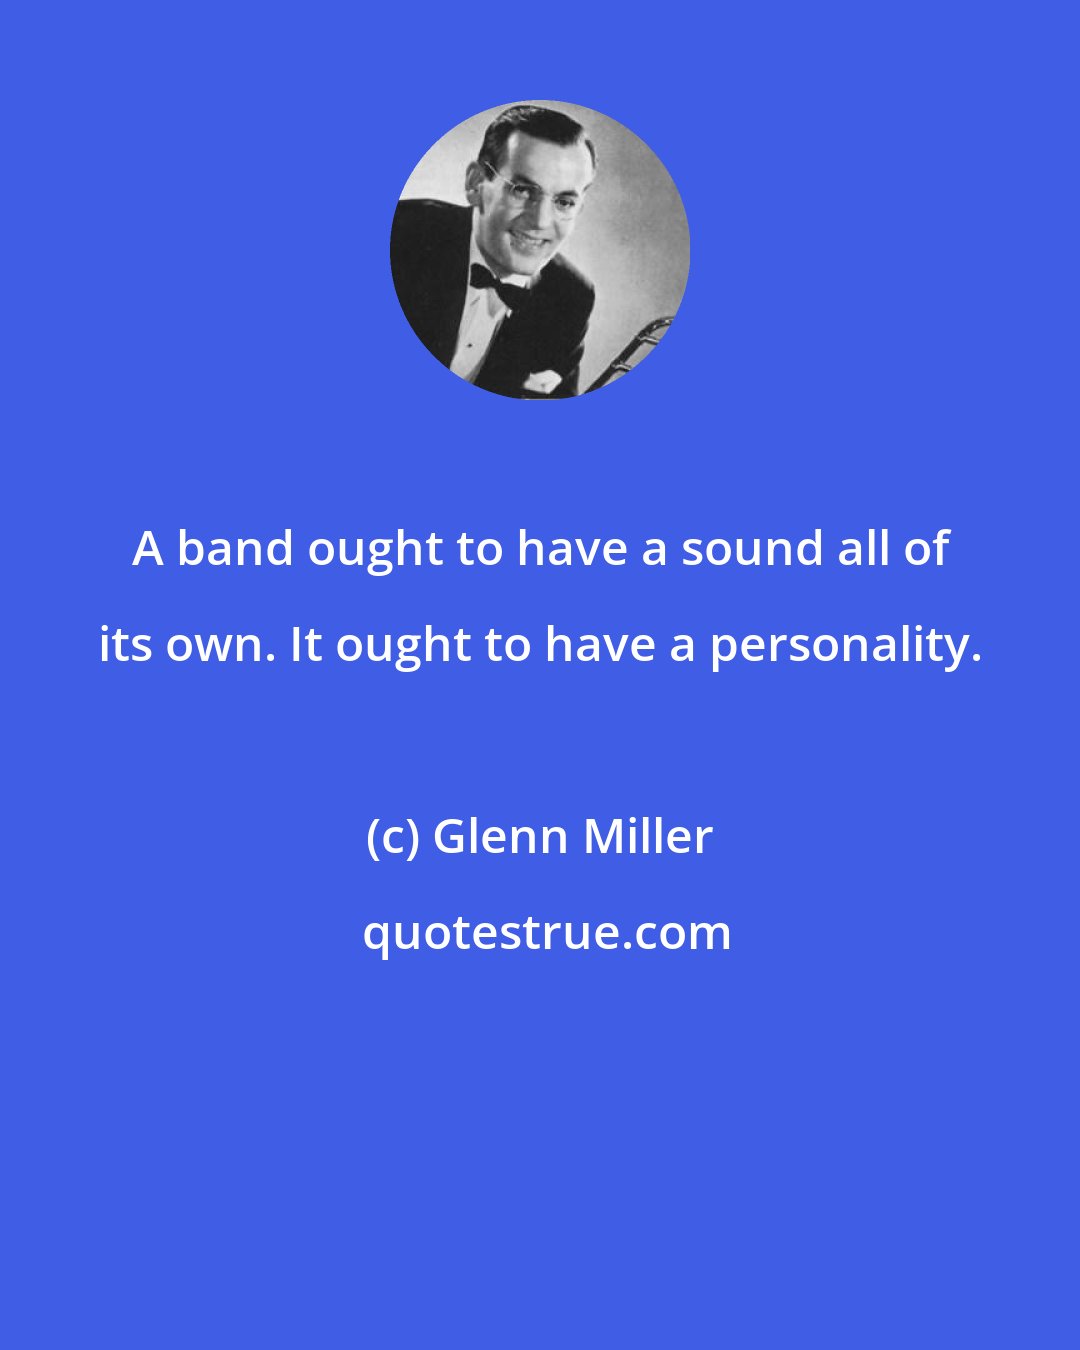 Glenn Miller: A band ought to have a sound all of its own. It ought to have a personality.